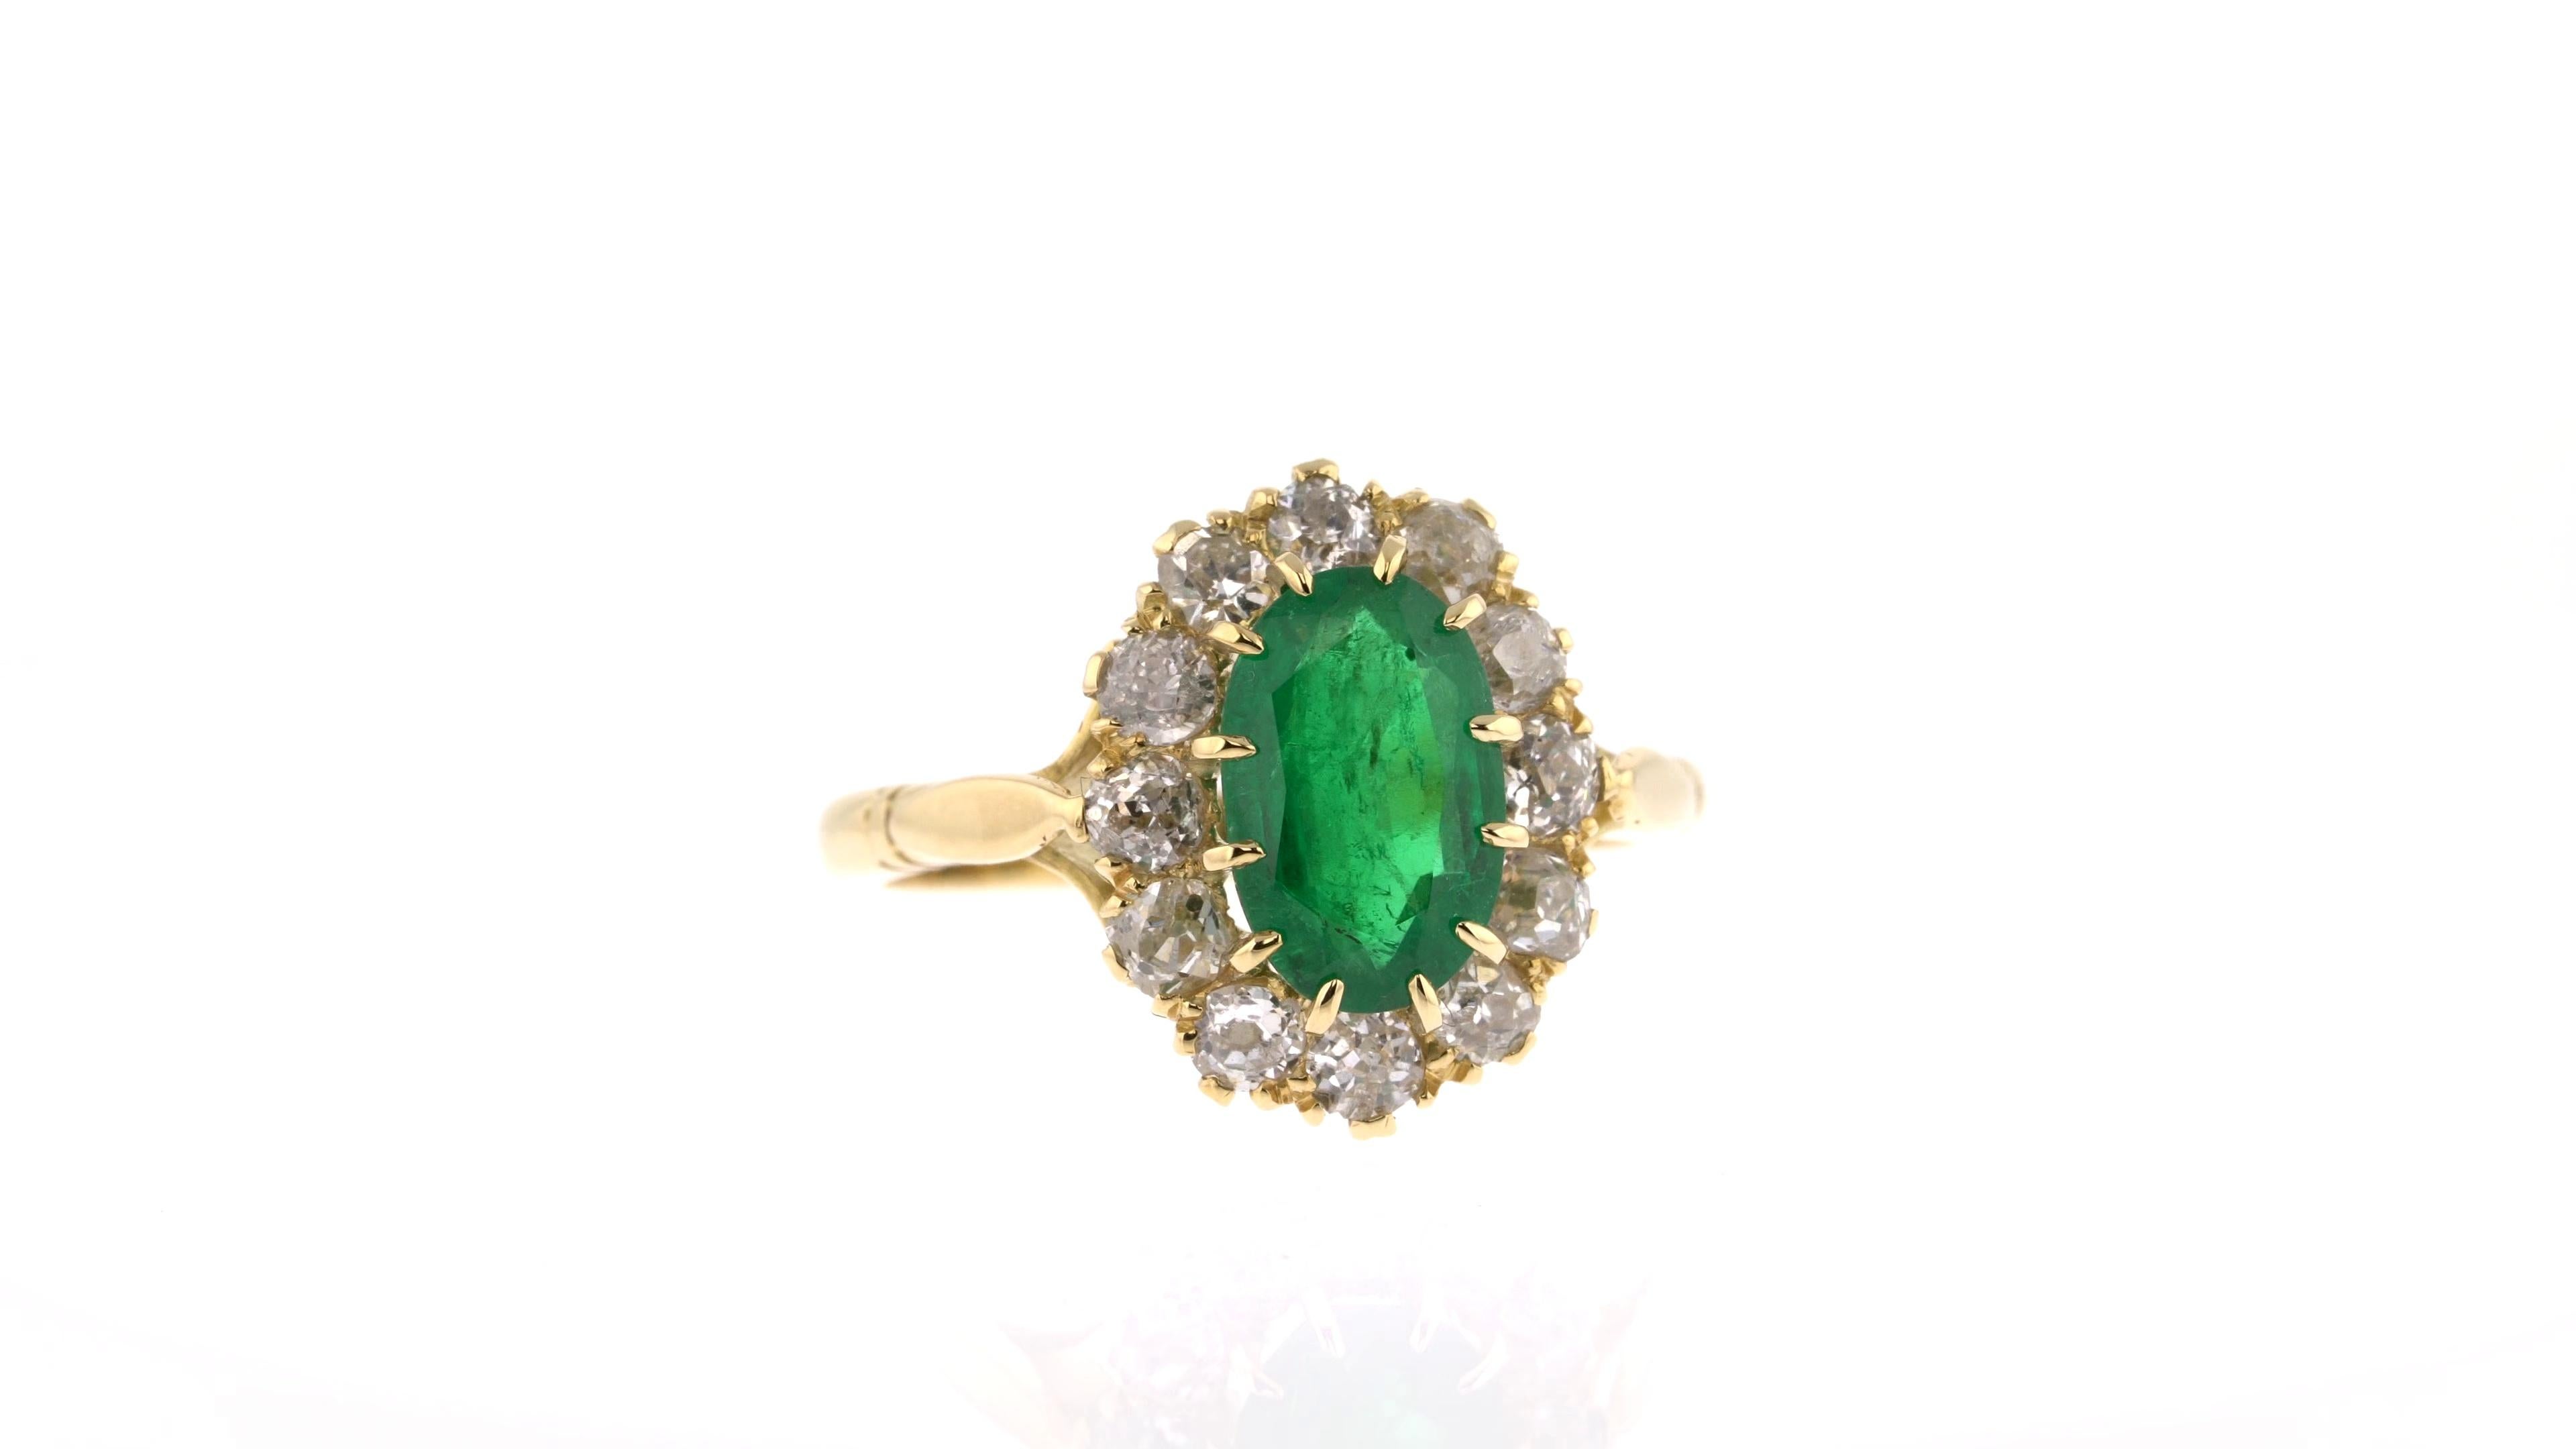 how much is the exquisite emerald ring worth